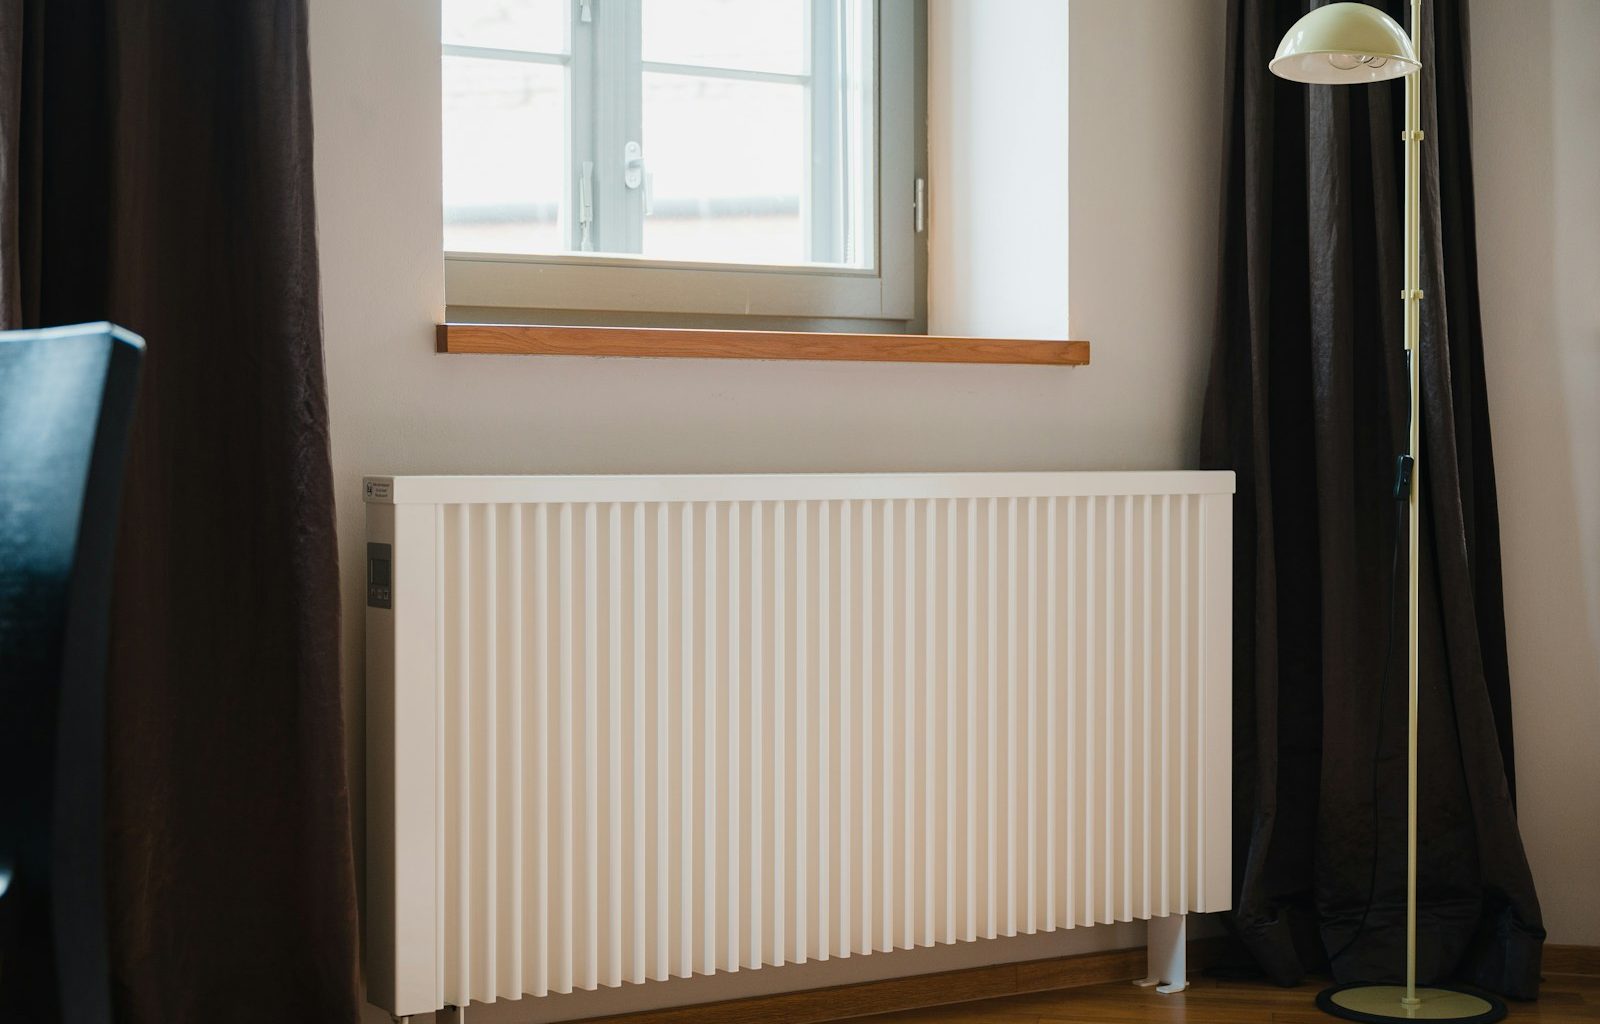 a white radiator in a room